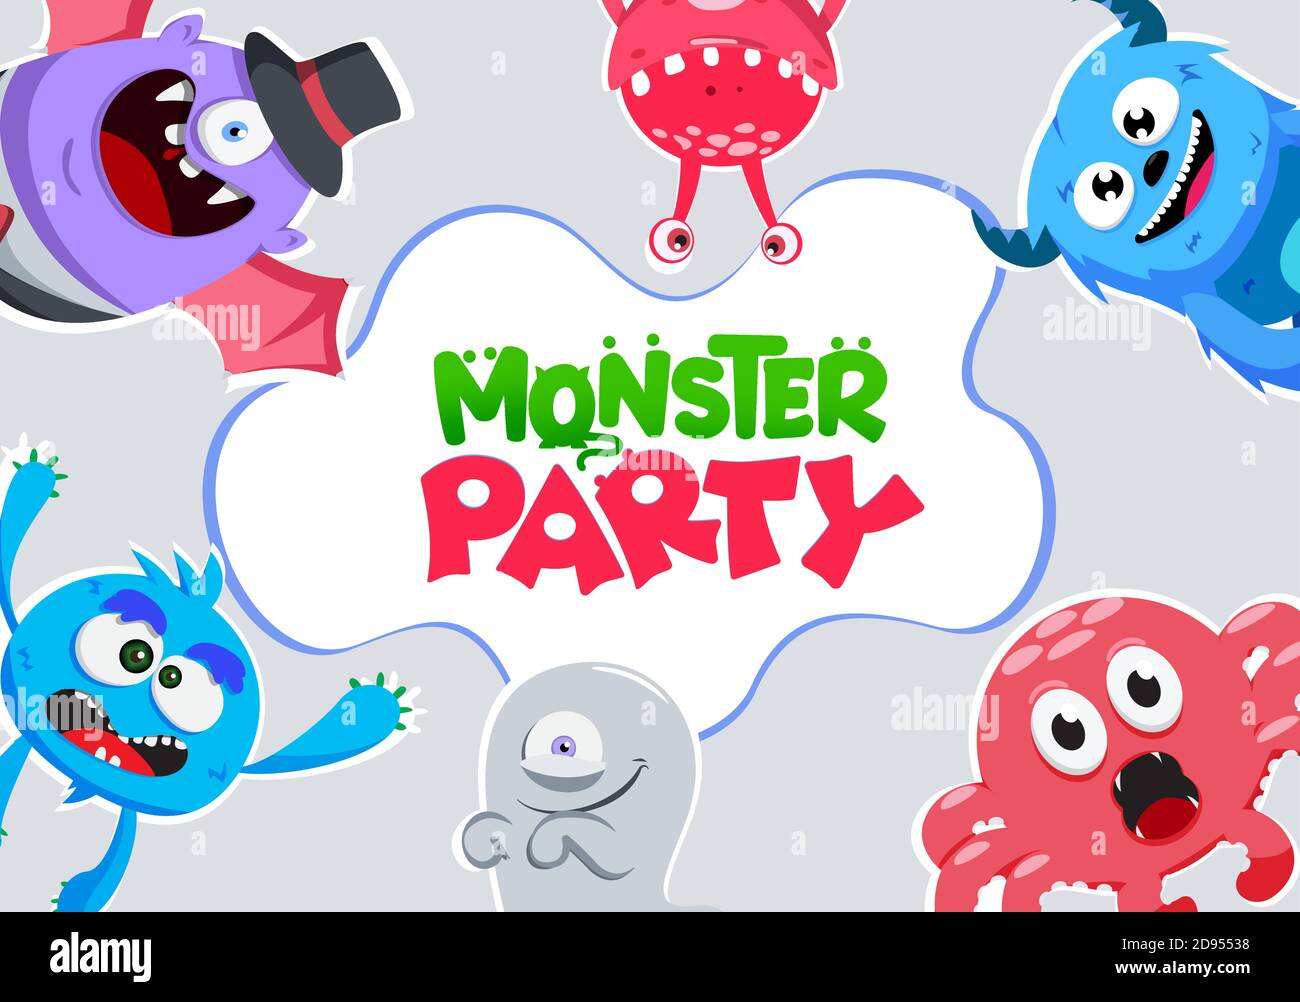 Monster party vector banner template. Monster party text with creepy ...